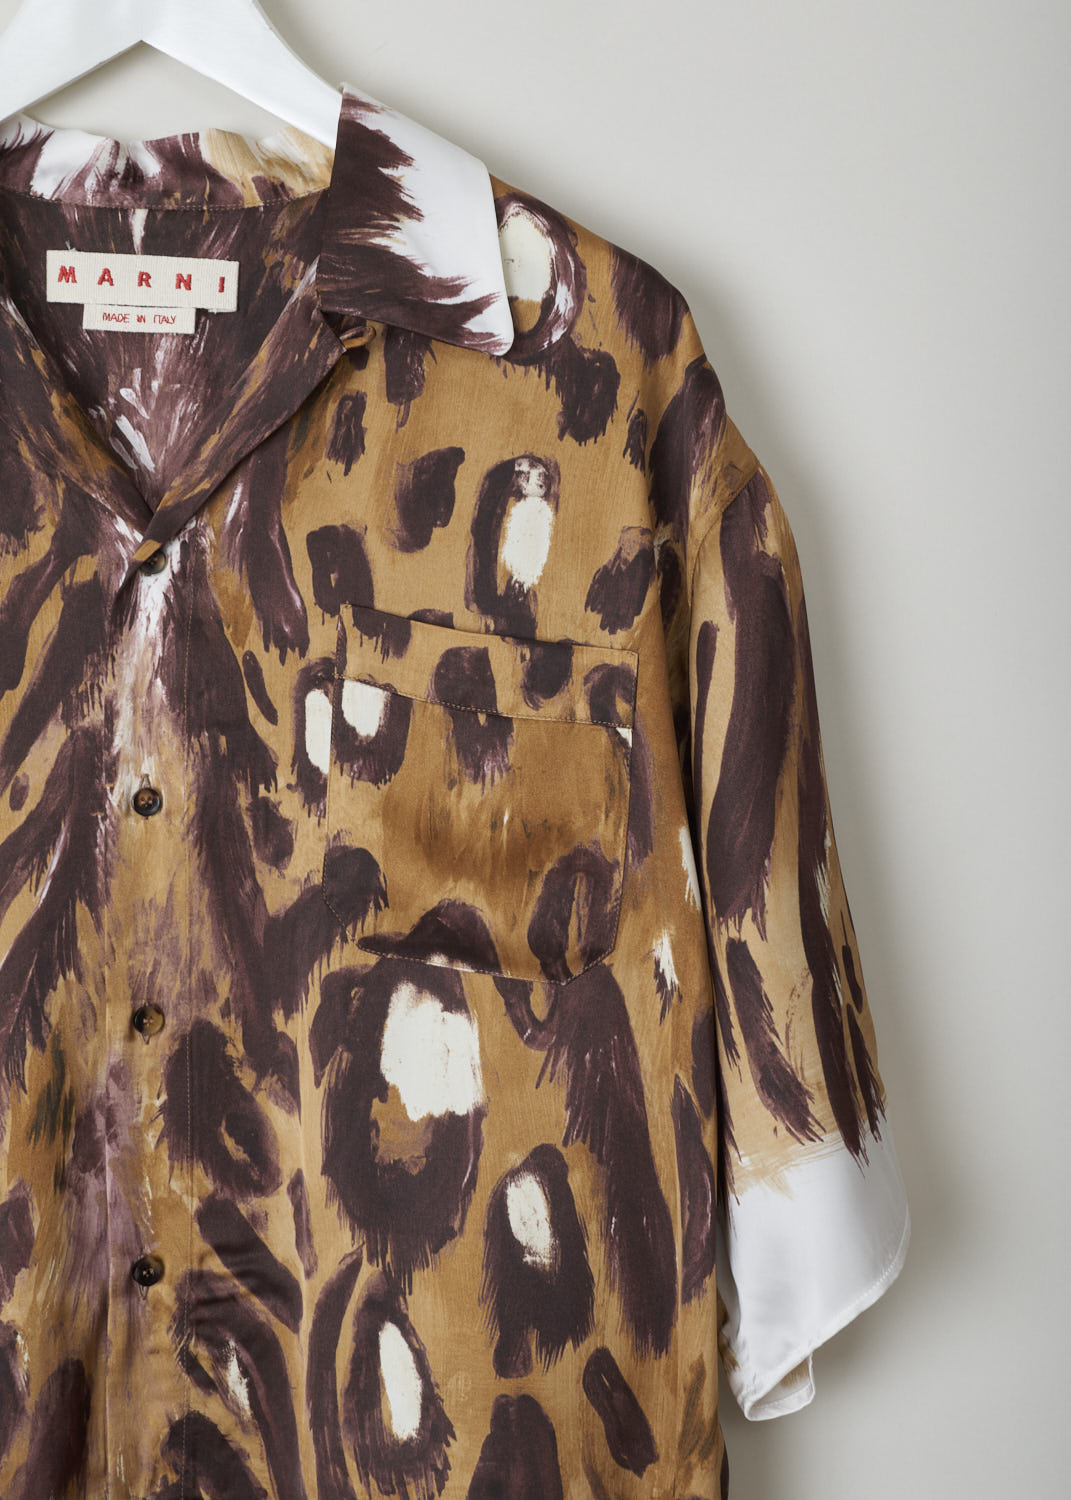 MARNI, ANIMAL PRINT BLOUSE WITH SHORT SLEEVES, CAMA0501A0_UTV912_WBM20, Brown, Print, Detail, This loose fitting short sleeved blouse is made in a satin animal print. This blouse features a classic collar, a single breast pocket and front button fastening. This model has an asymmetrical finish, meaning the back is a little longer than the front.
